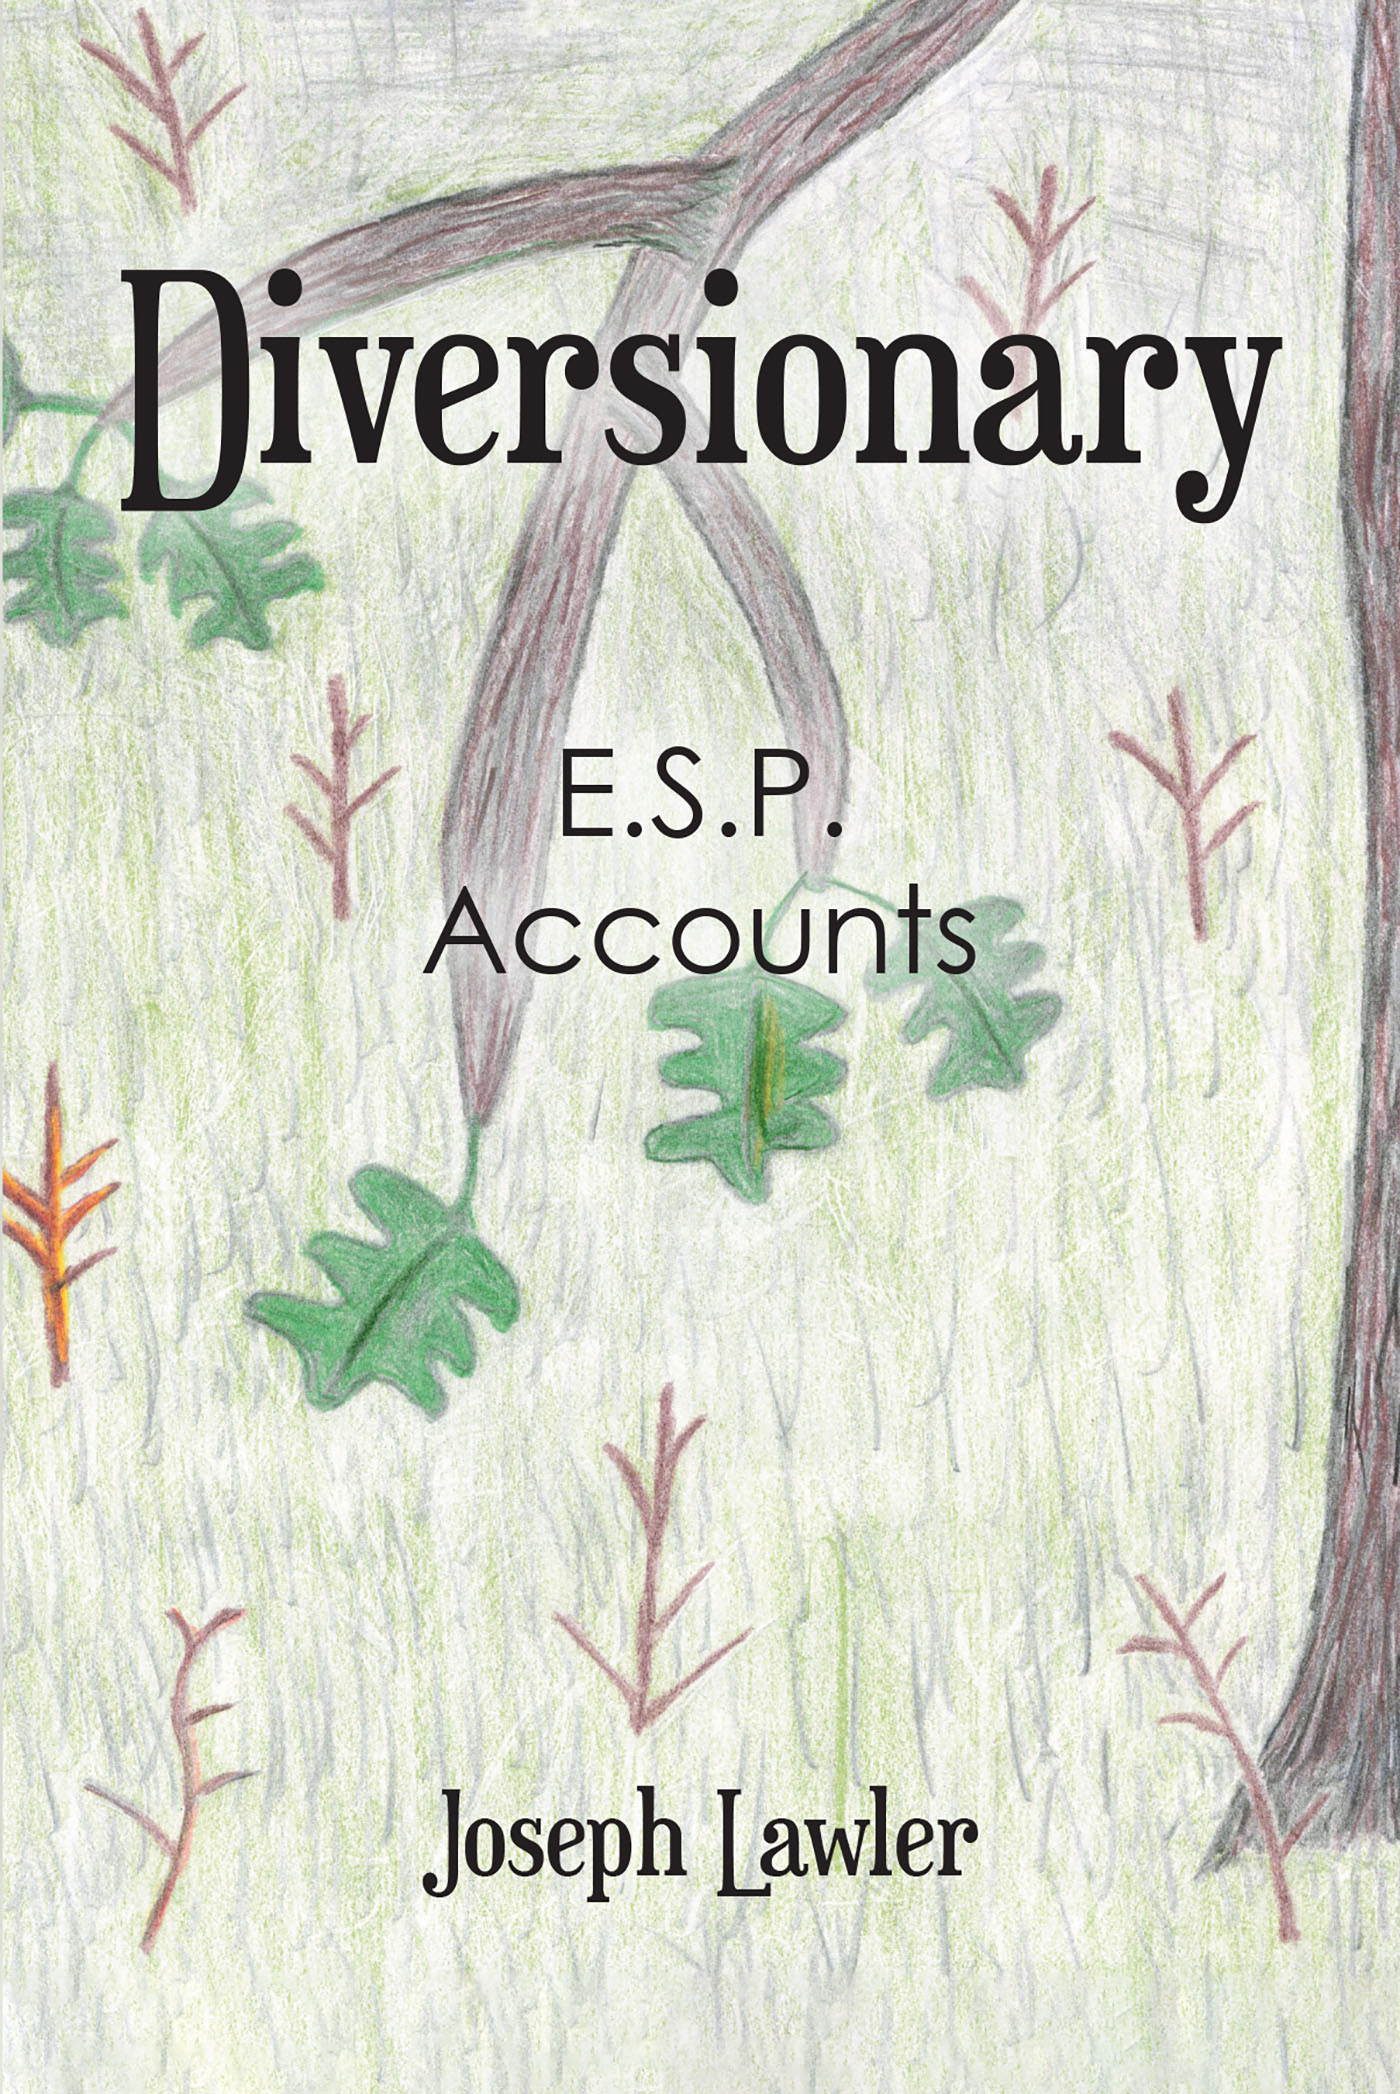 Author Joseph Lawler’s New Book, "Diversionary: E.S.P. Accounts," Follows the Author as He Experiences Astral Visions That Reveal Truths About the Physical World